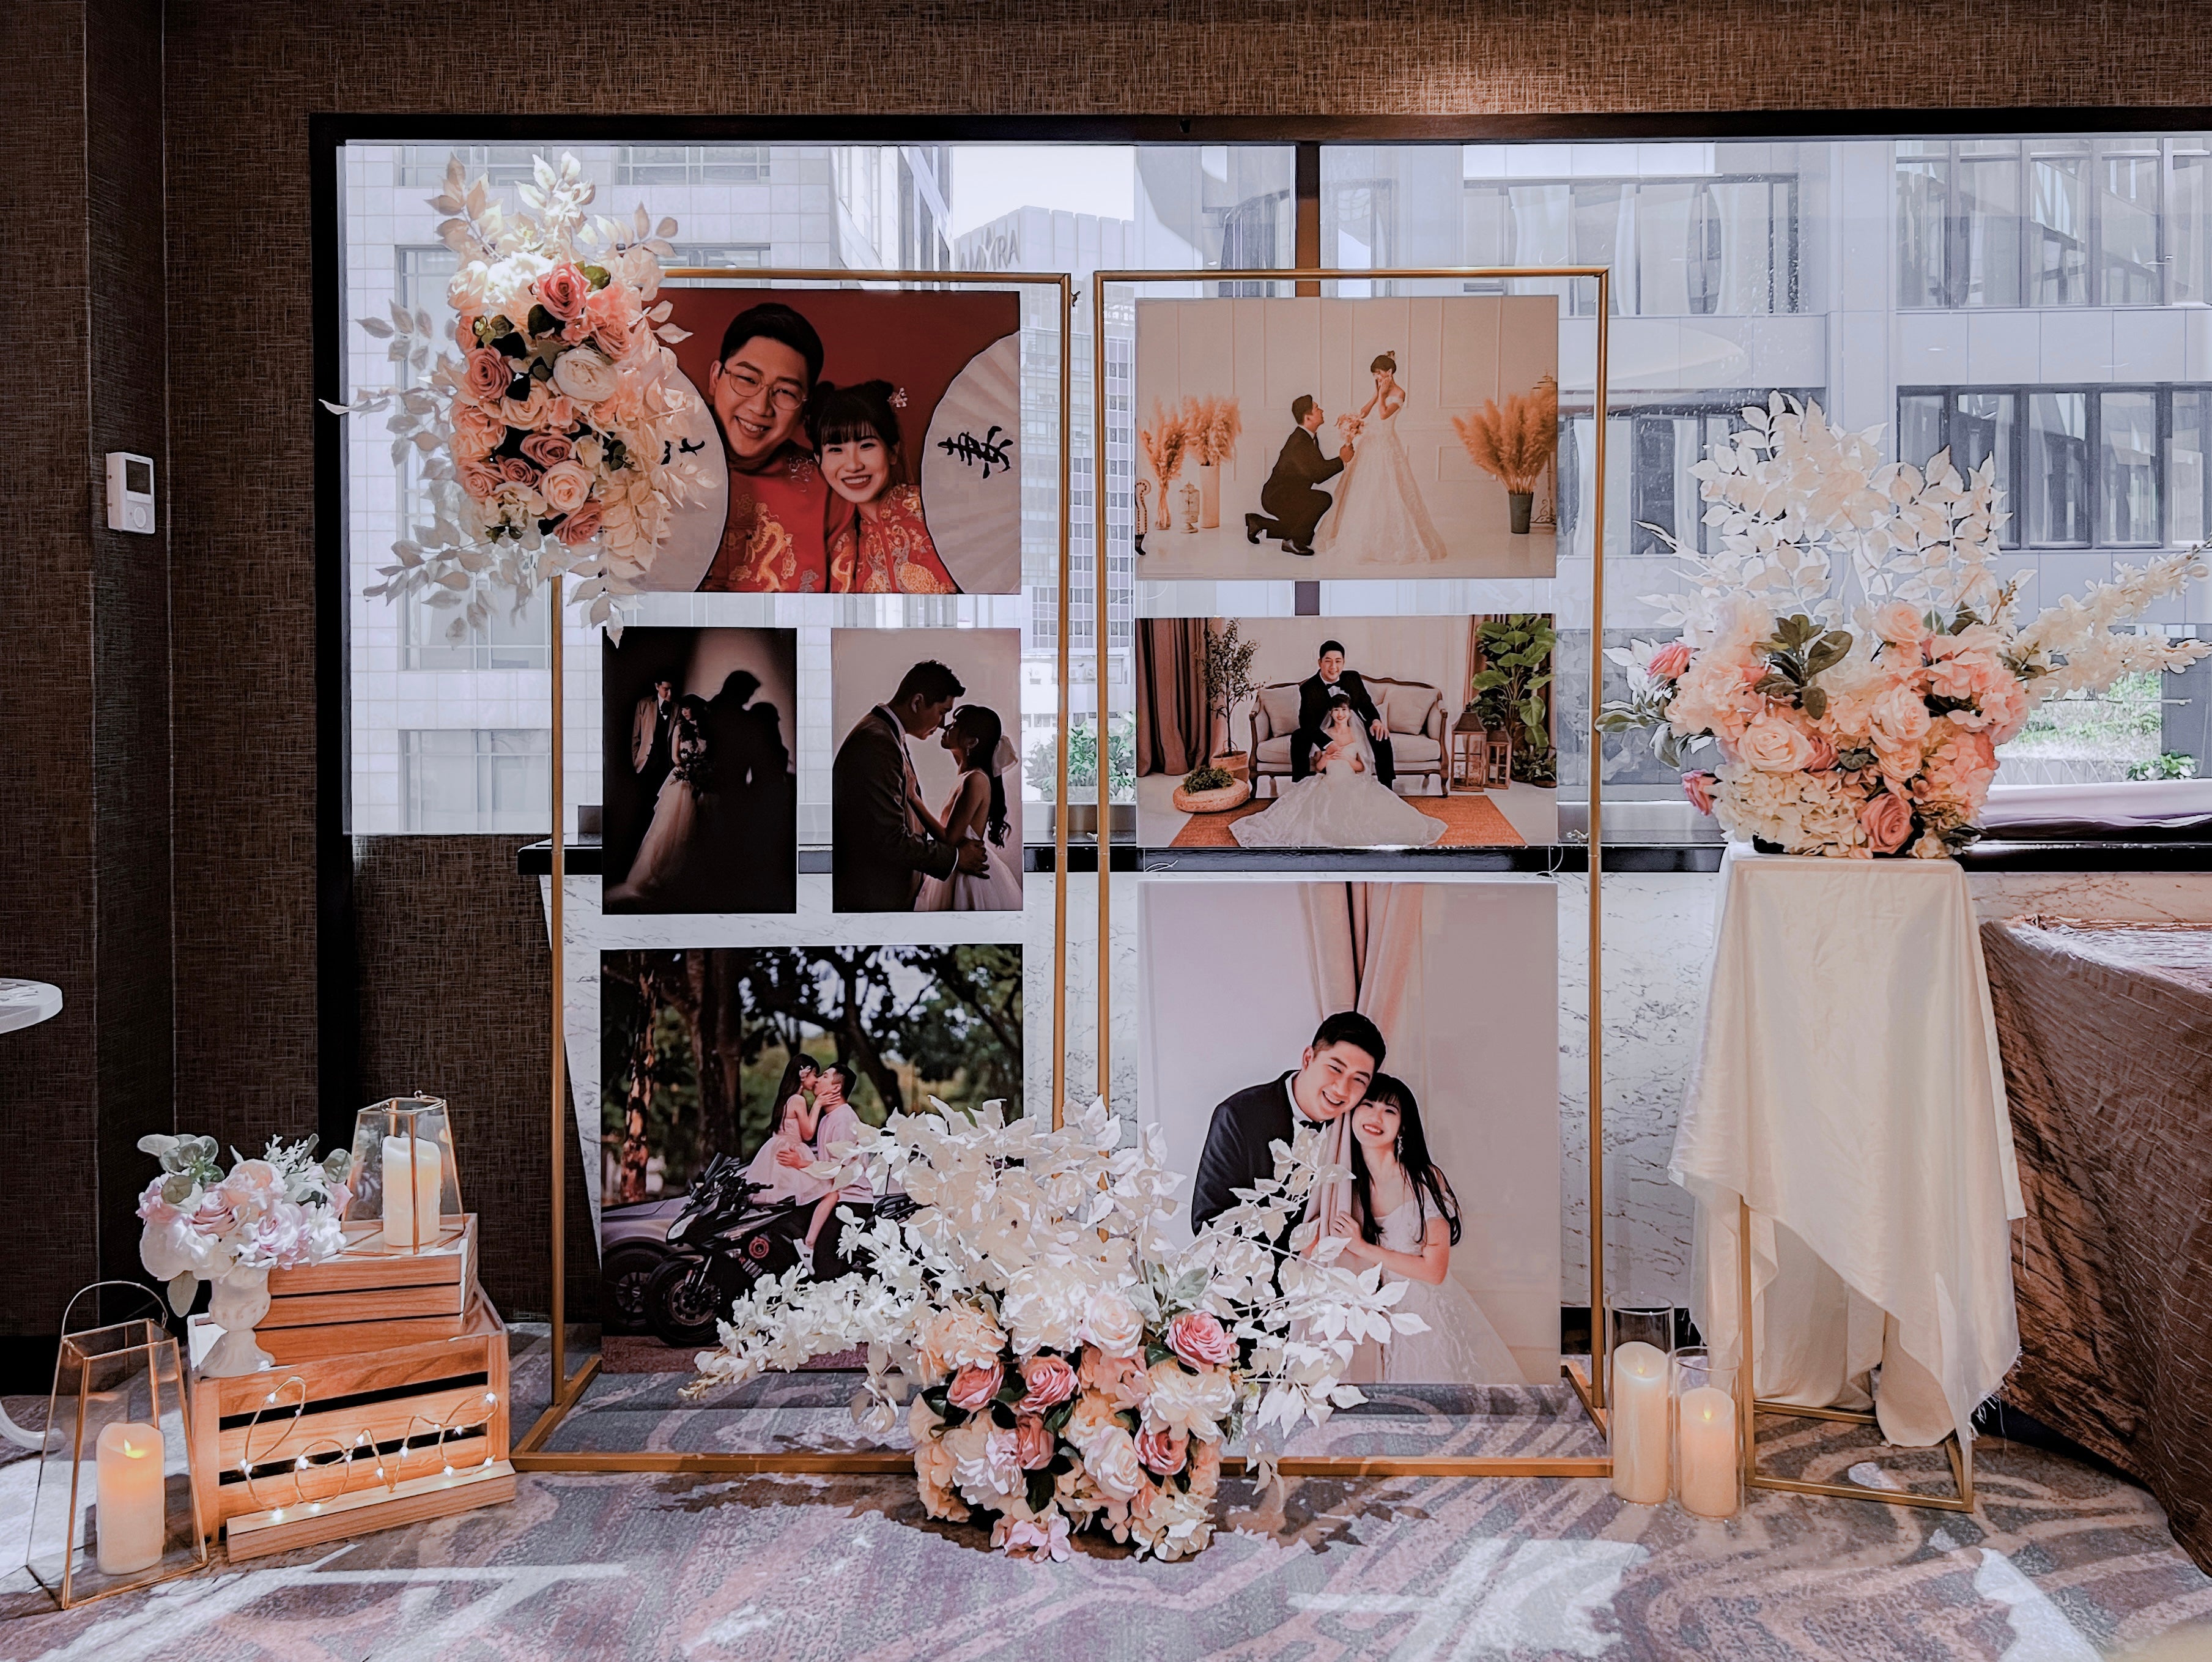 Wedding Reception Decor in Singapore - Multi-stands Photo Gallery with Pink & White Florals (Venue: M Hotel)